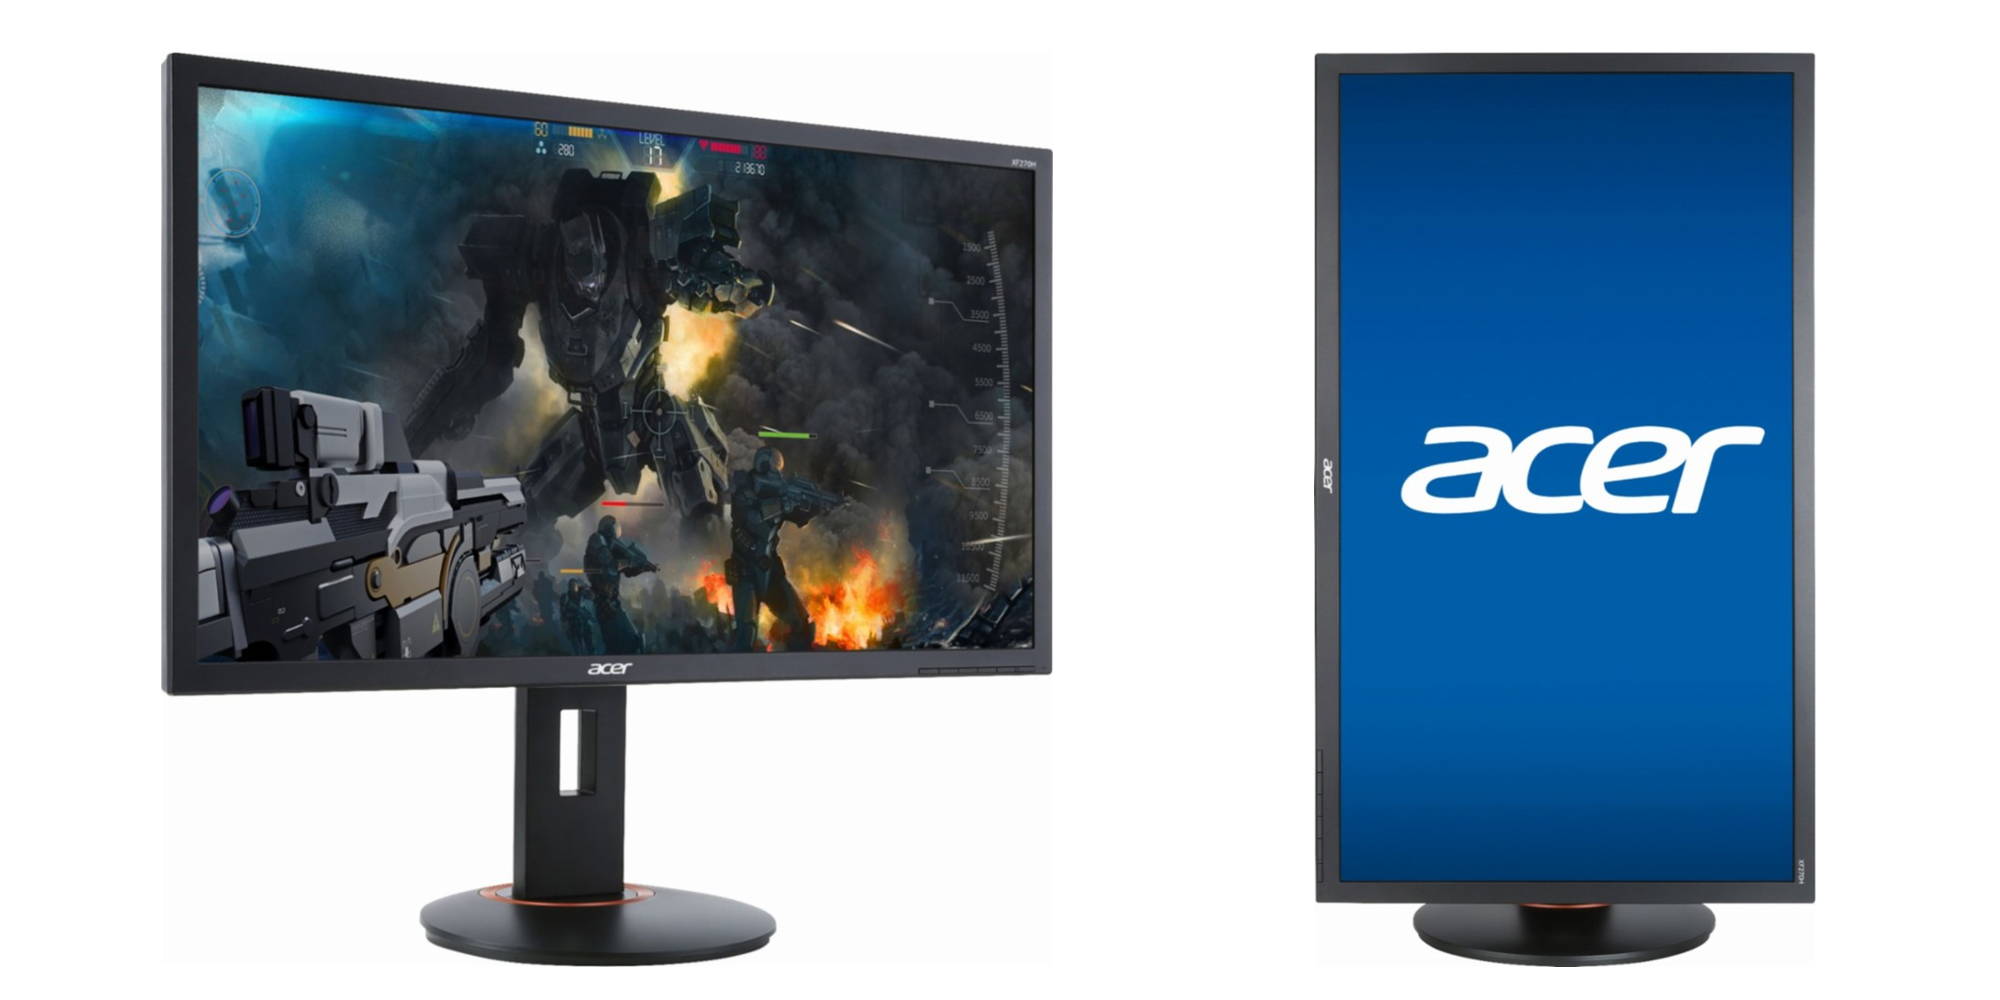 Step Up Your Game W Acer S 27 Inch 240hz Monitor At 300 Reg Up To 400 9to5toys